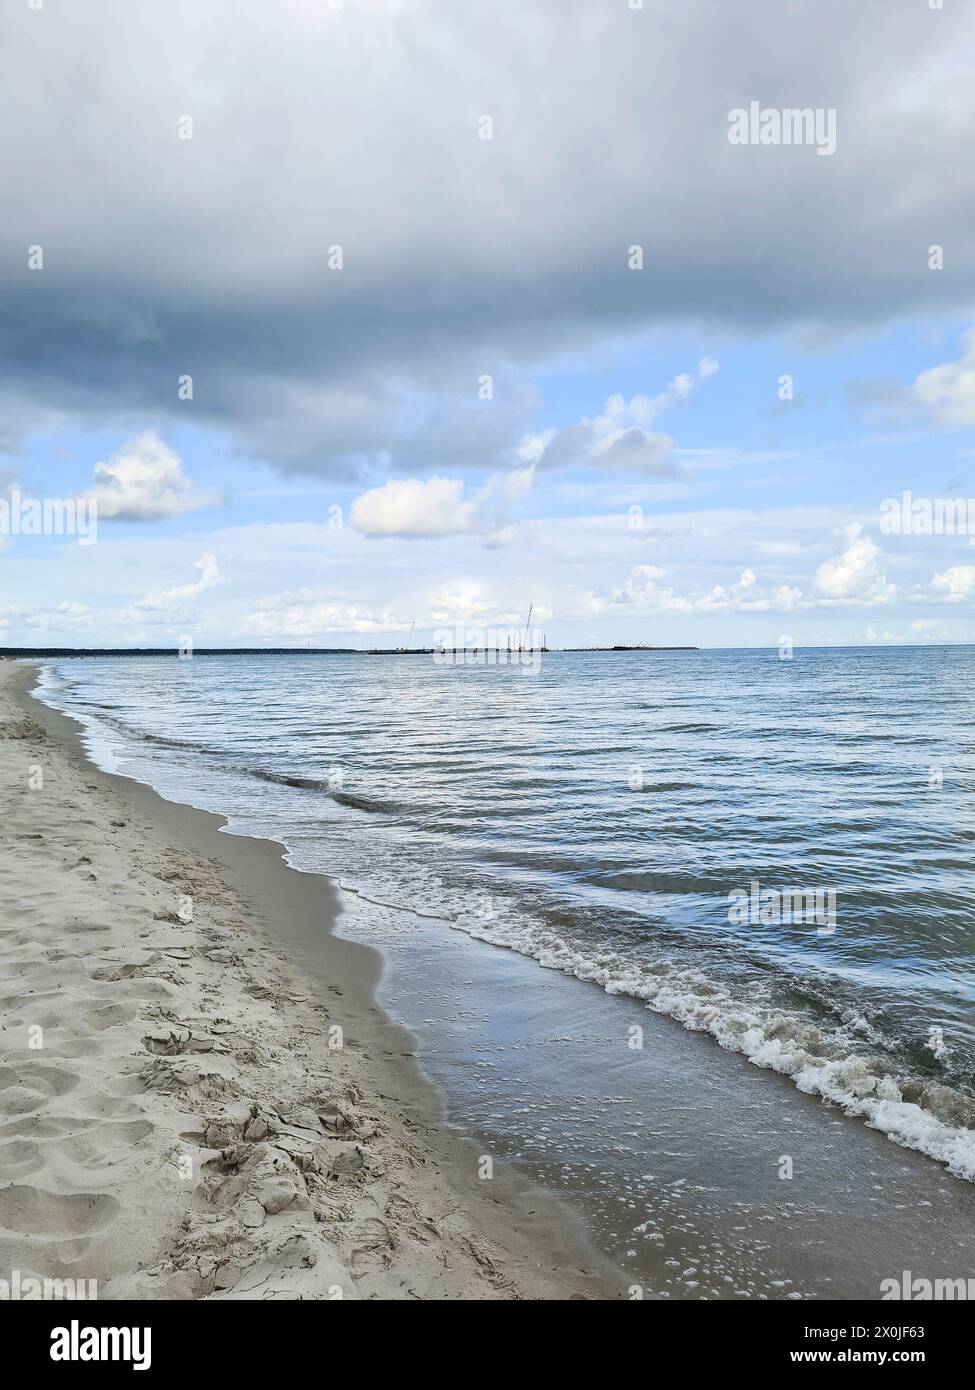 Germany, Mecklenburg-Western Pomerania, Prerow, Cloud formation in the sky above the beach of Prerow on the Baltic Sea coast Stock Photo